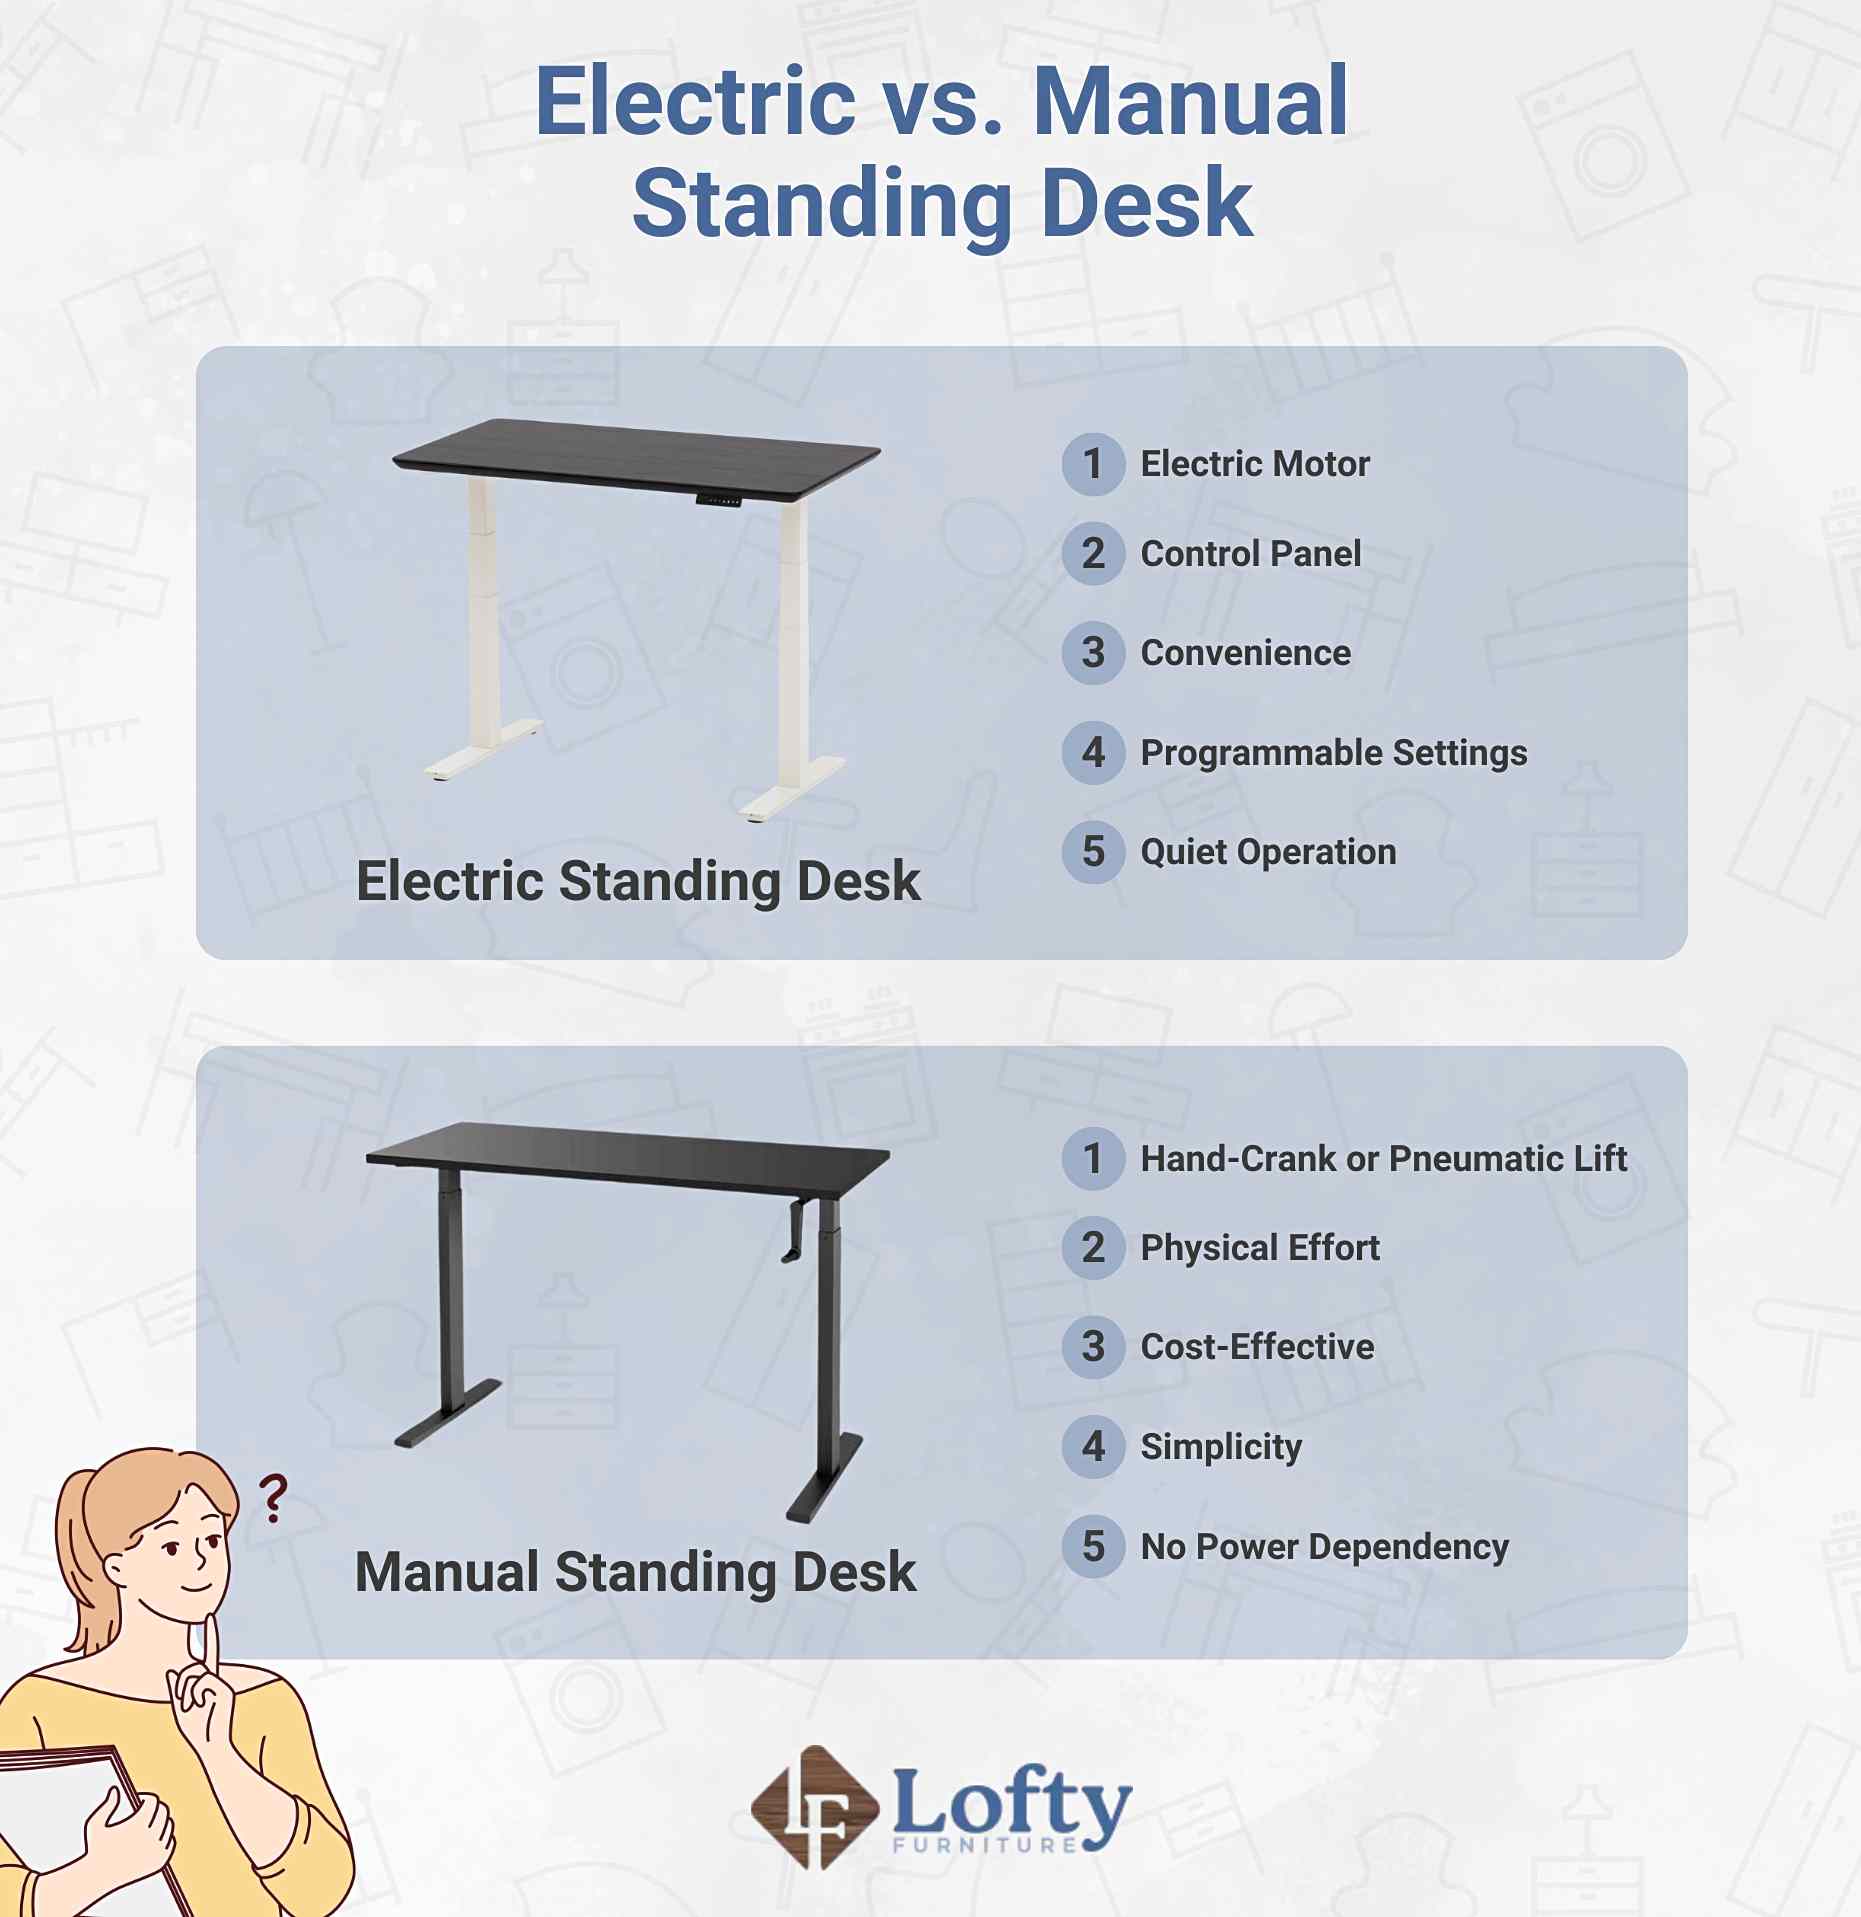 A graphic comparison between electric vs. manual standing desk.